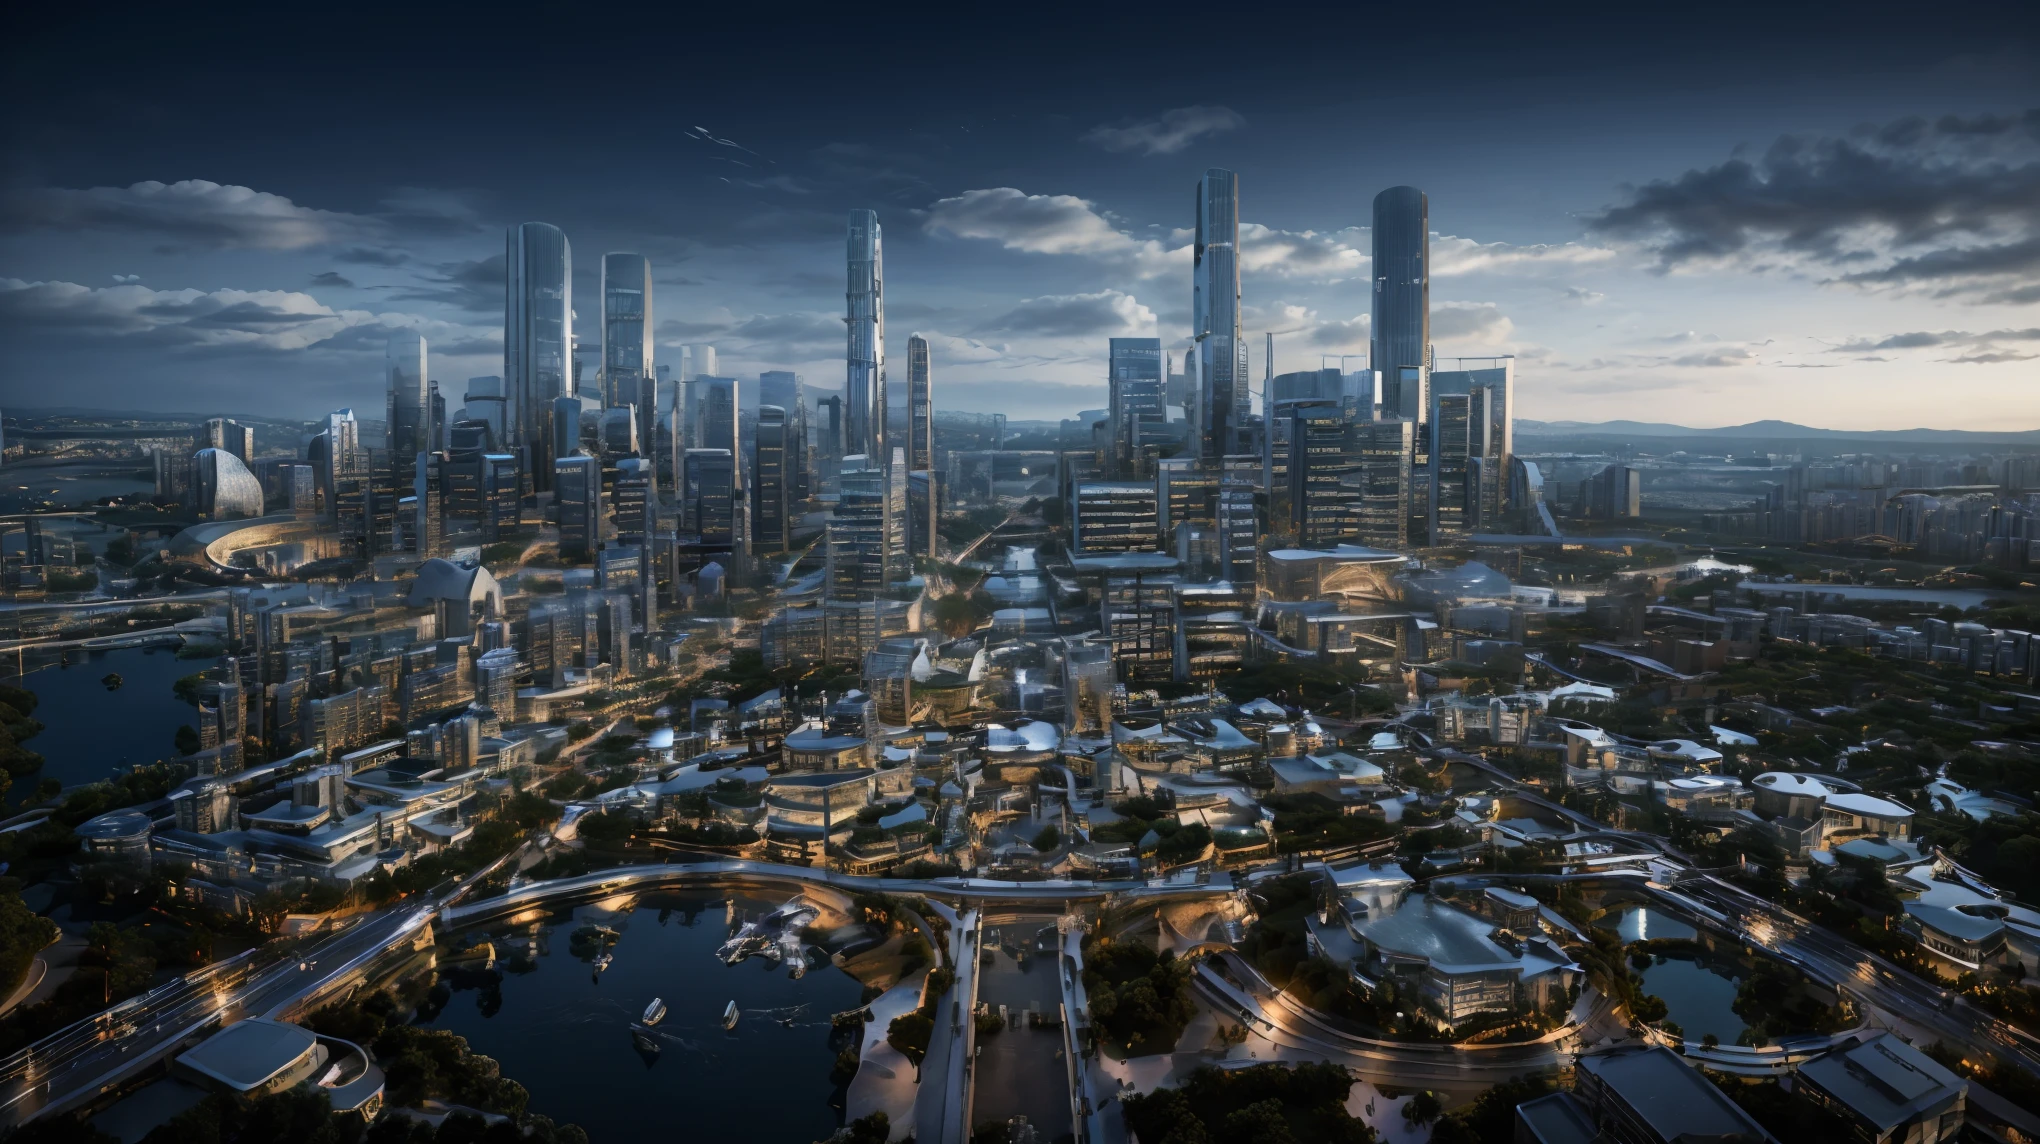 (best quality,4k,8k,highres,masterpiece:1.2),ultra-detailed,(realistic,photorealistic,photo-realistic:1.37),futuristic,gigantic biomechanical structures,towering skyscrapers,endless cityscape,gleaming lights reflecting on the surface of Megacity 2077,advanced technology integrated seamlessly with architecture,nanotechnology infused in every detail,hovering vehicles darting through the sky,extensive network of bridges and walkways connecting buildings,bustling population moving in all directions,advanced robotics and AI assistants assisting residents,advanced holographic displays projecting information into the air,exquisite metallic textures and reflective materials,interplay of shadows and light,neon lights illuminating the night,ethereal colors changing with the rhythm of the city,sublime color contrast between the dark abyss and the luminous metropolis,dynamic atmosphere with swirling clouds and flying debris,elevated monorails weaving through the city,cloud-piercing mega towers stretching into the sky,a sense of awe and wonder as one gazes upon the cityscape,the surreal merging of humanity and technology,inspiring a vision of the future of mankind.